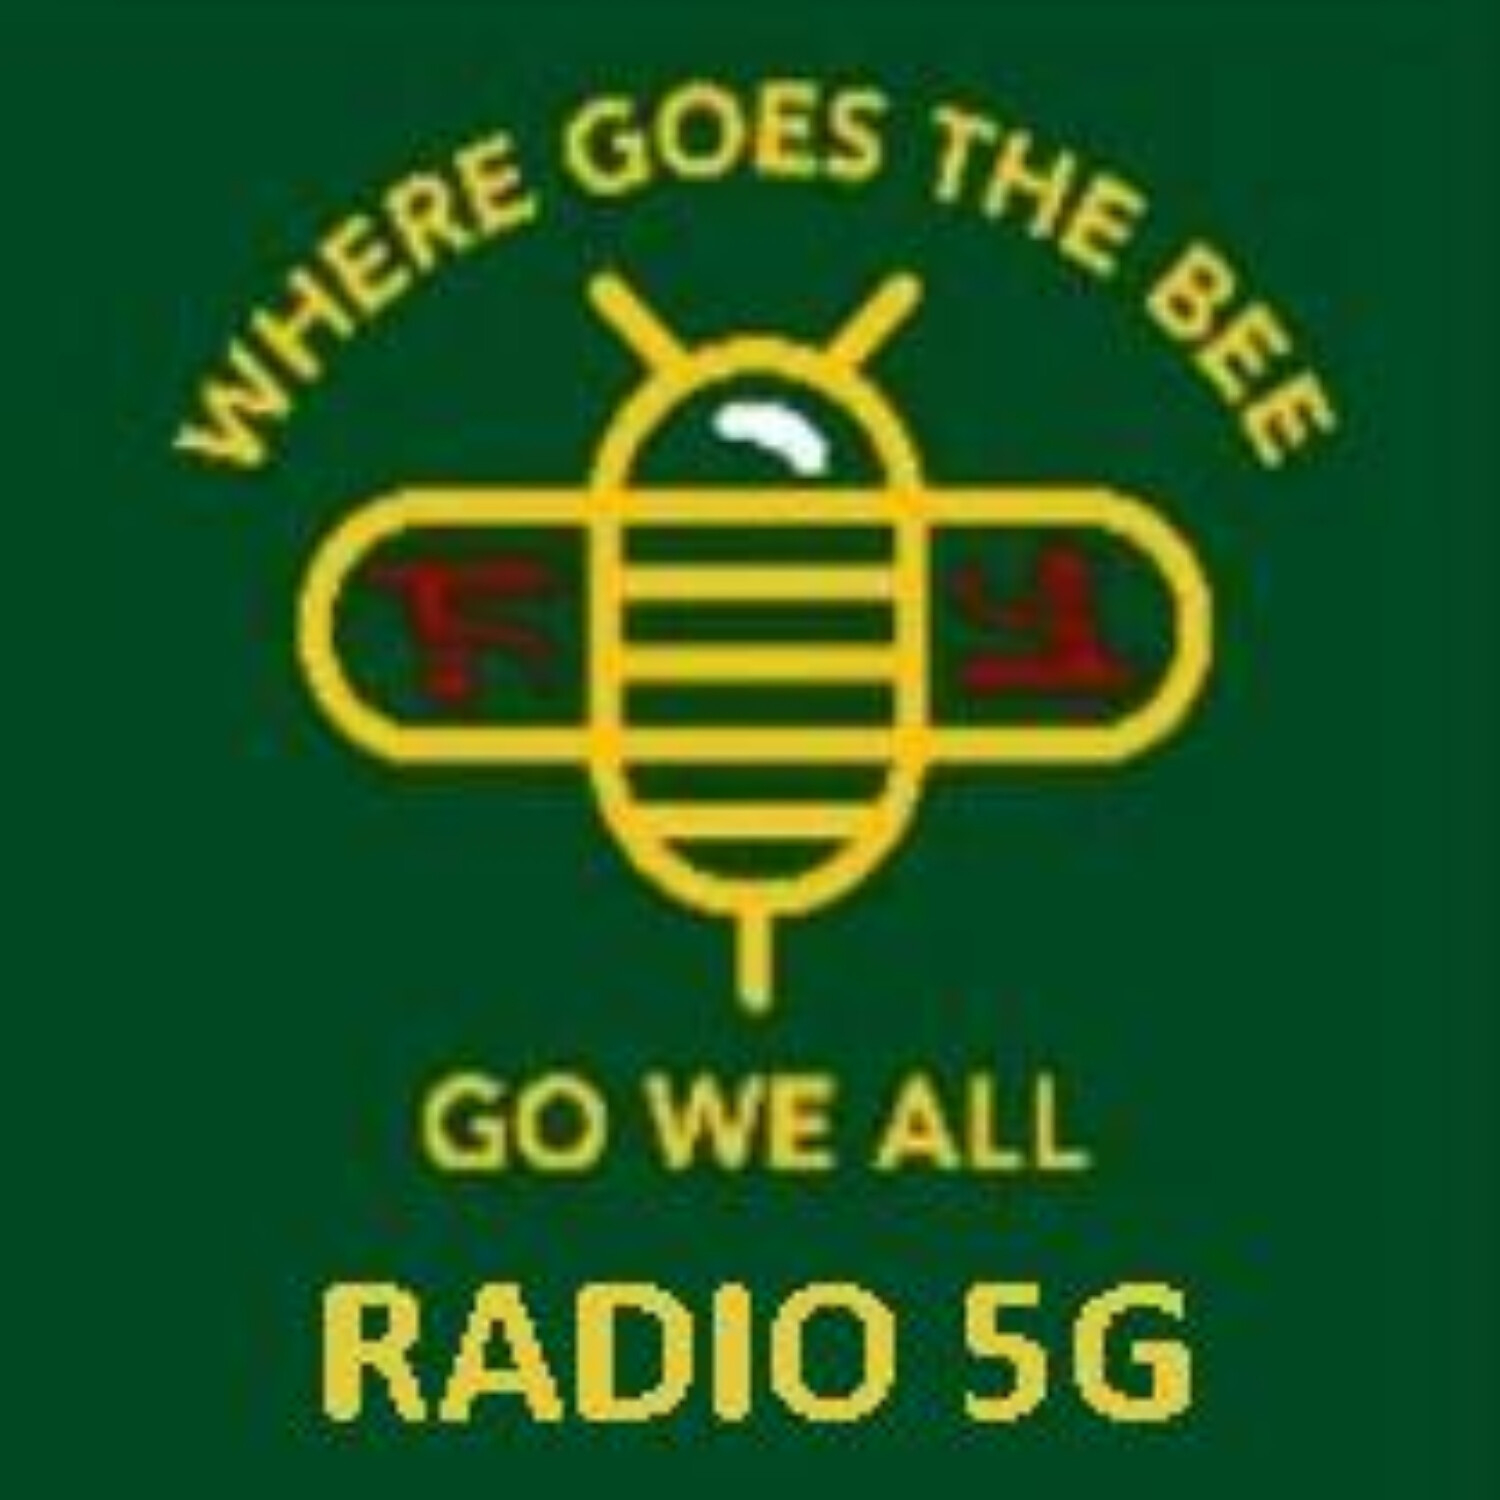 RADIO 5G 9/28/22 - The Financial Puppeteers